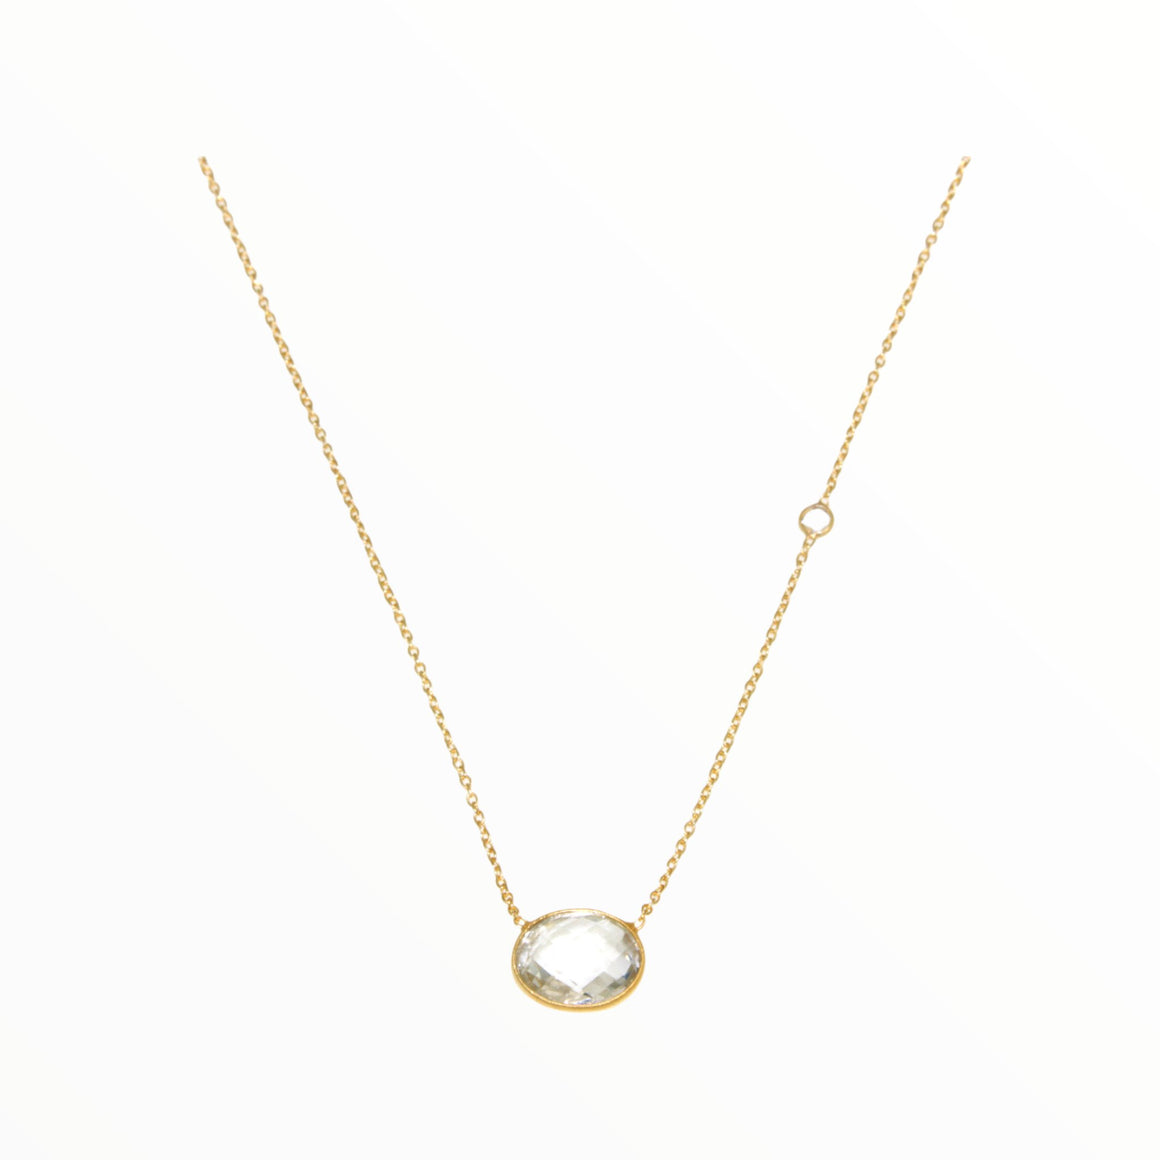 Natalia Classic Necklace in Green Amethyst and White Topaz